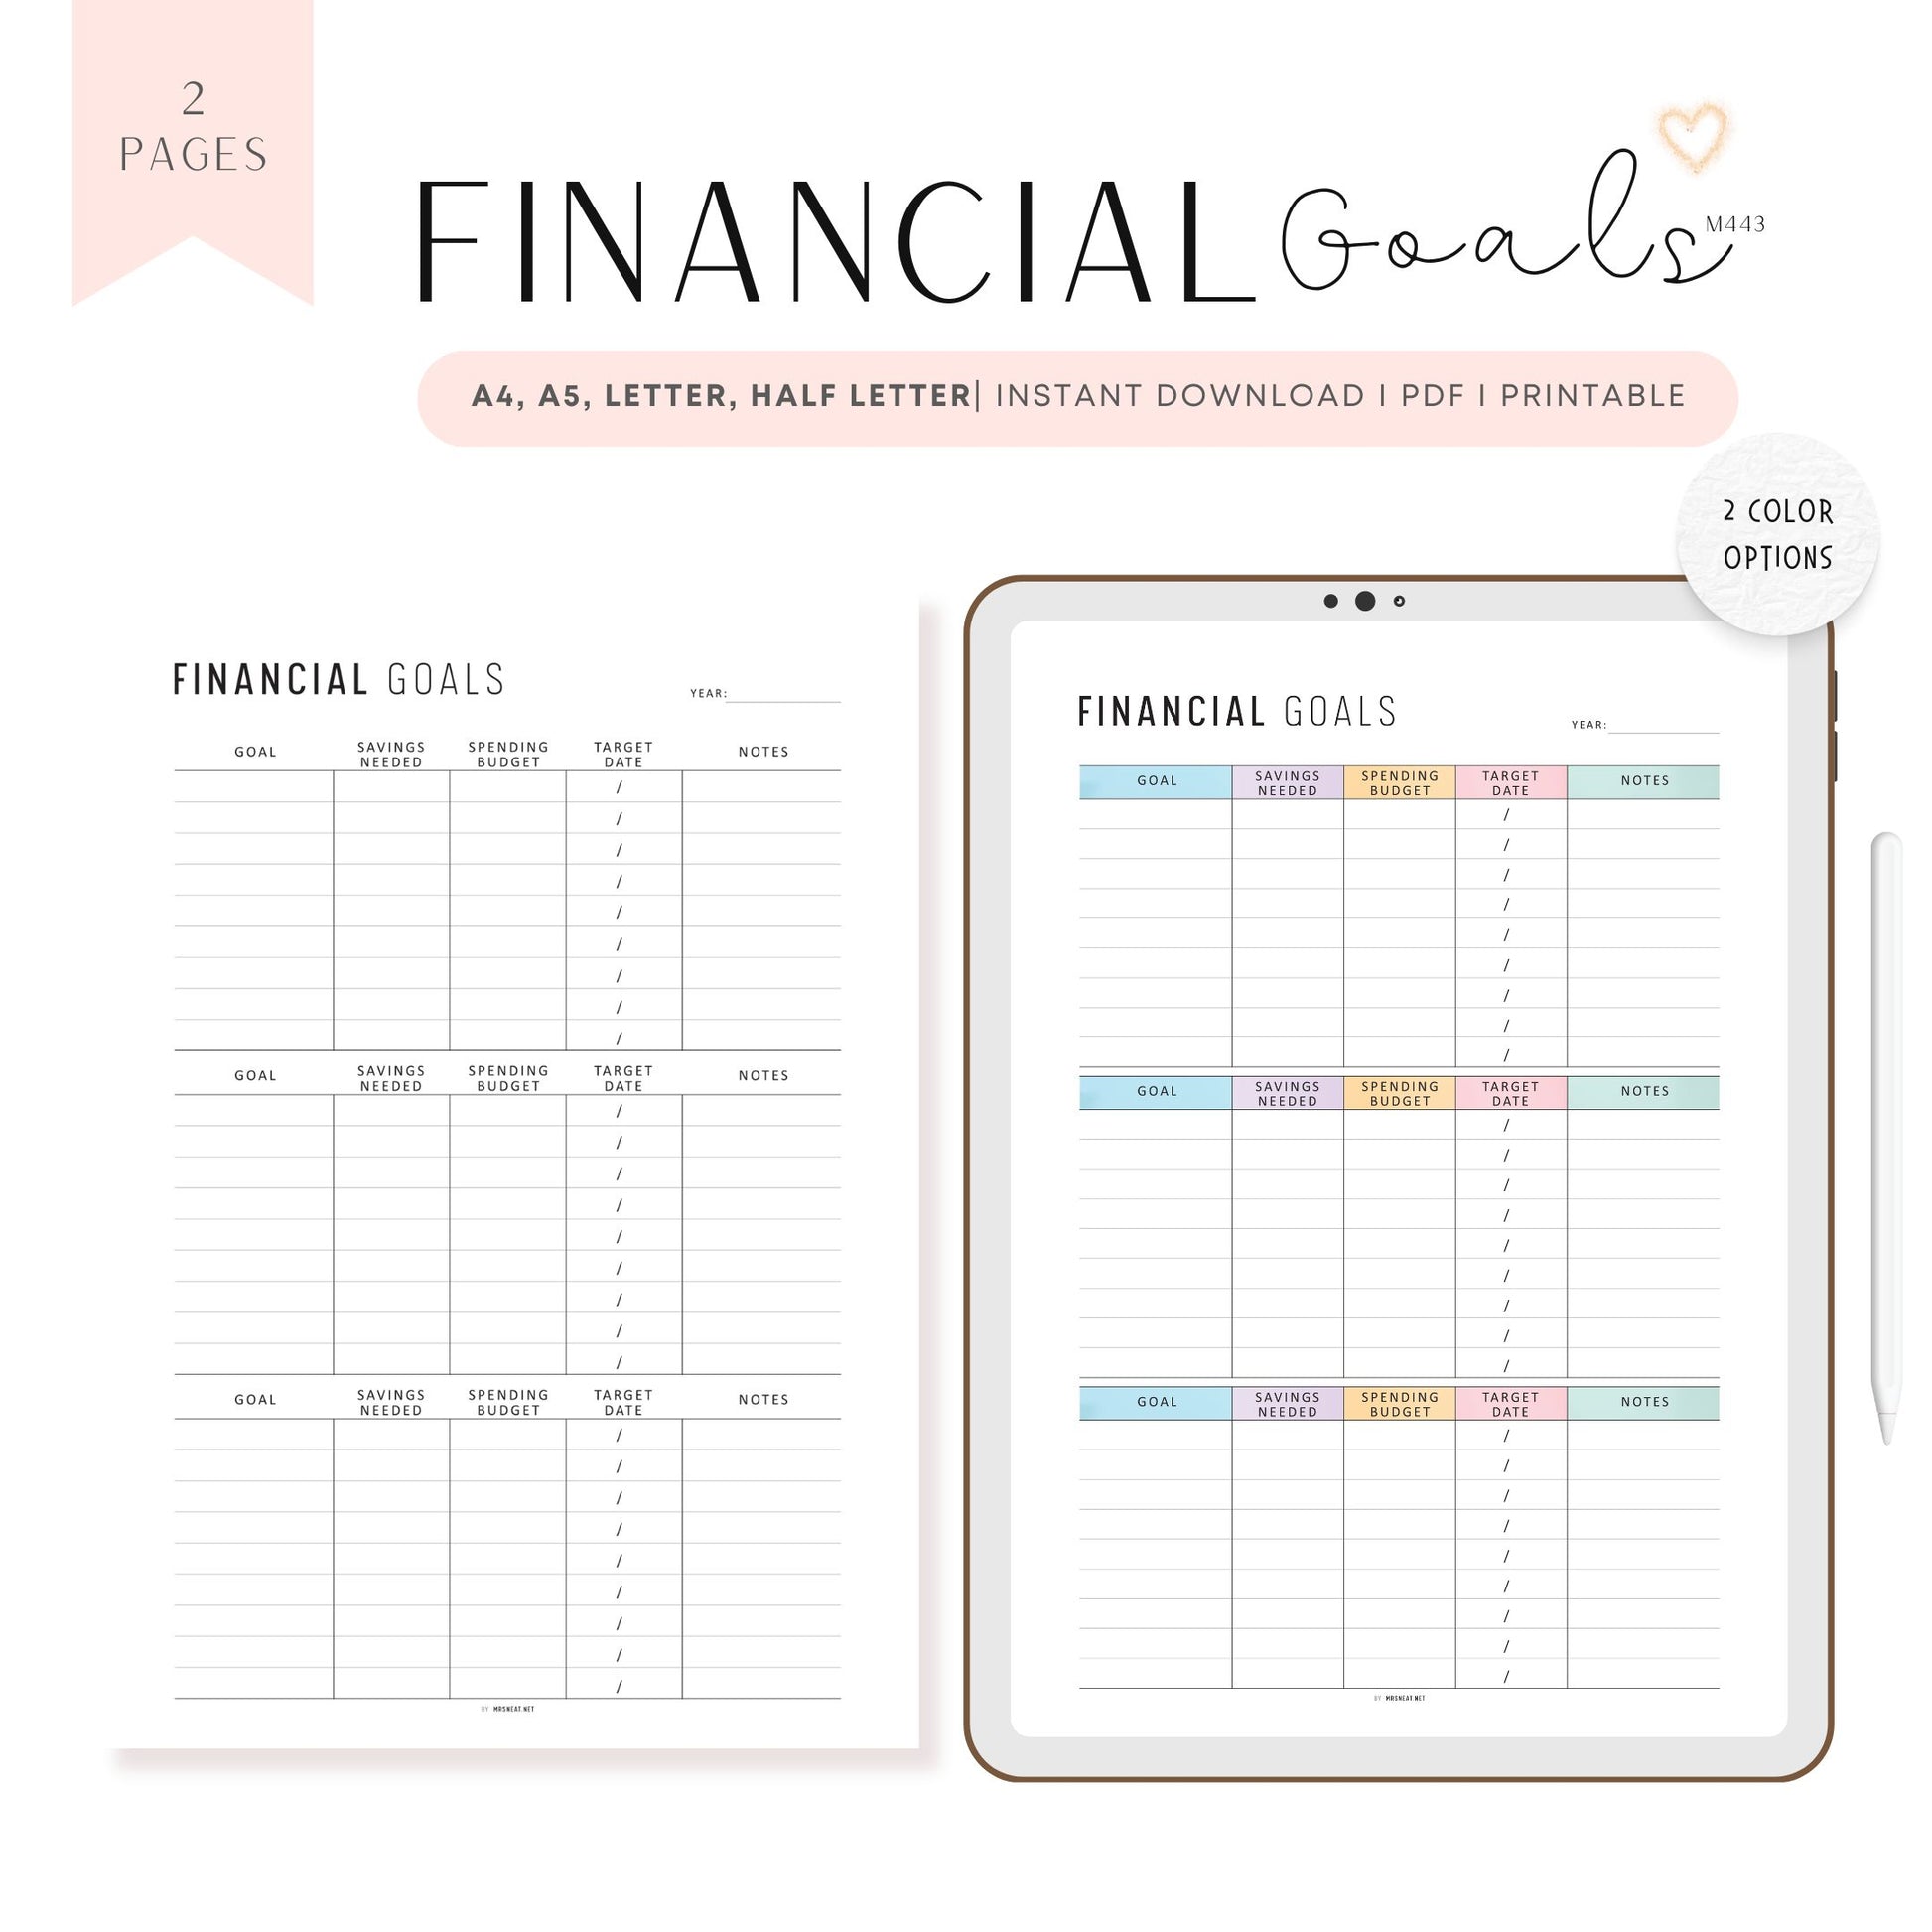 Financial Goals Printable, A4, A5, Letter, Half Letter, Minimalist and Colorful Page